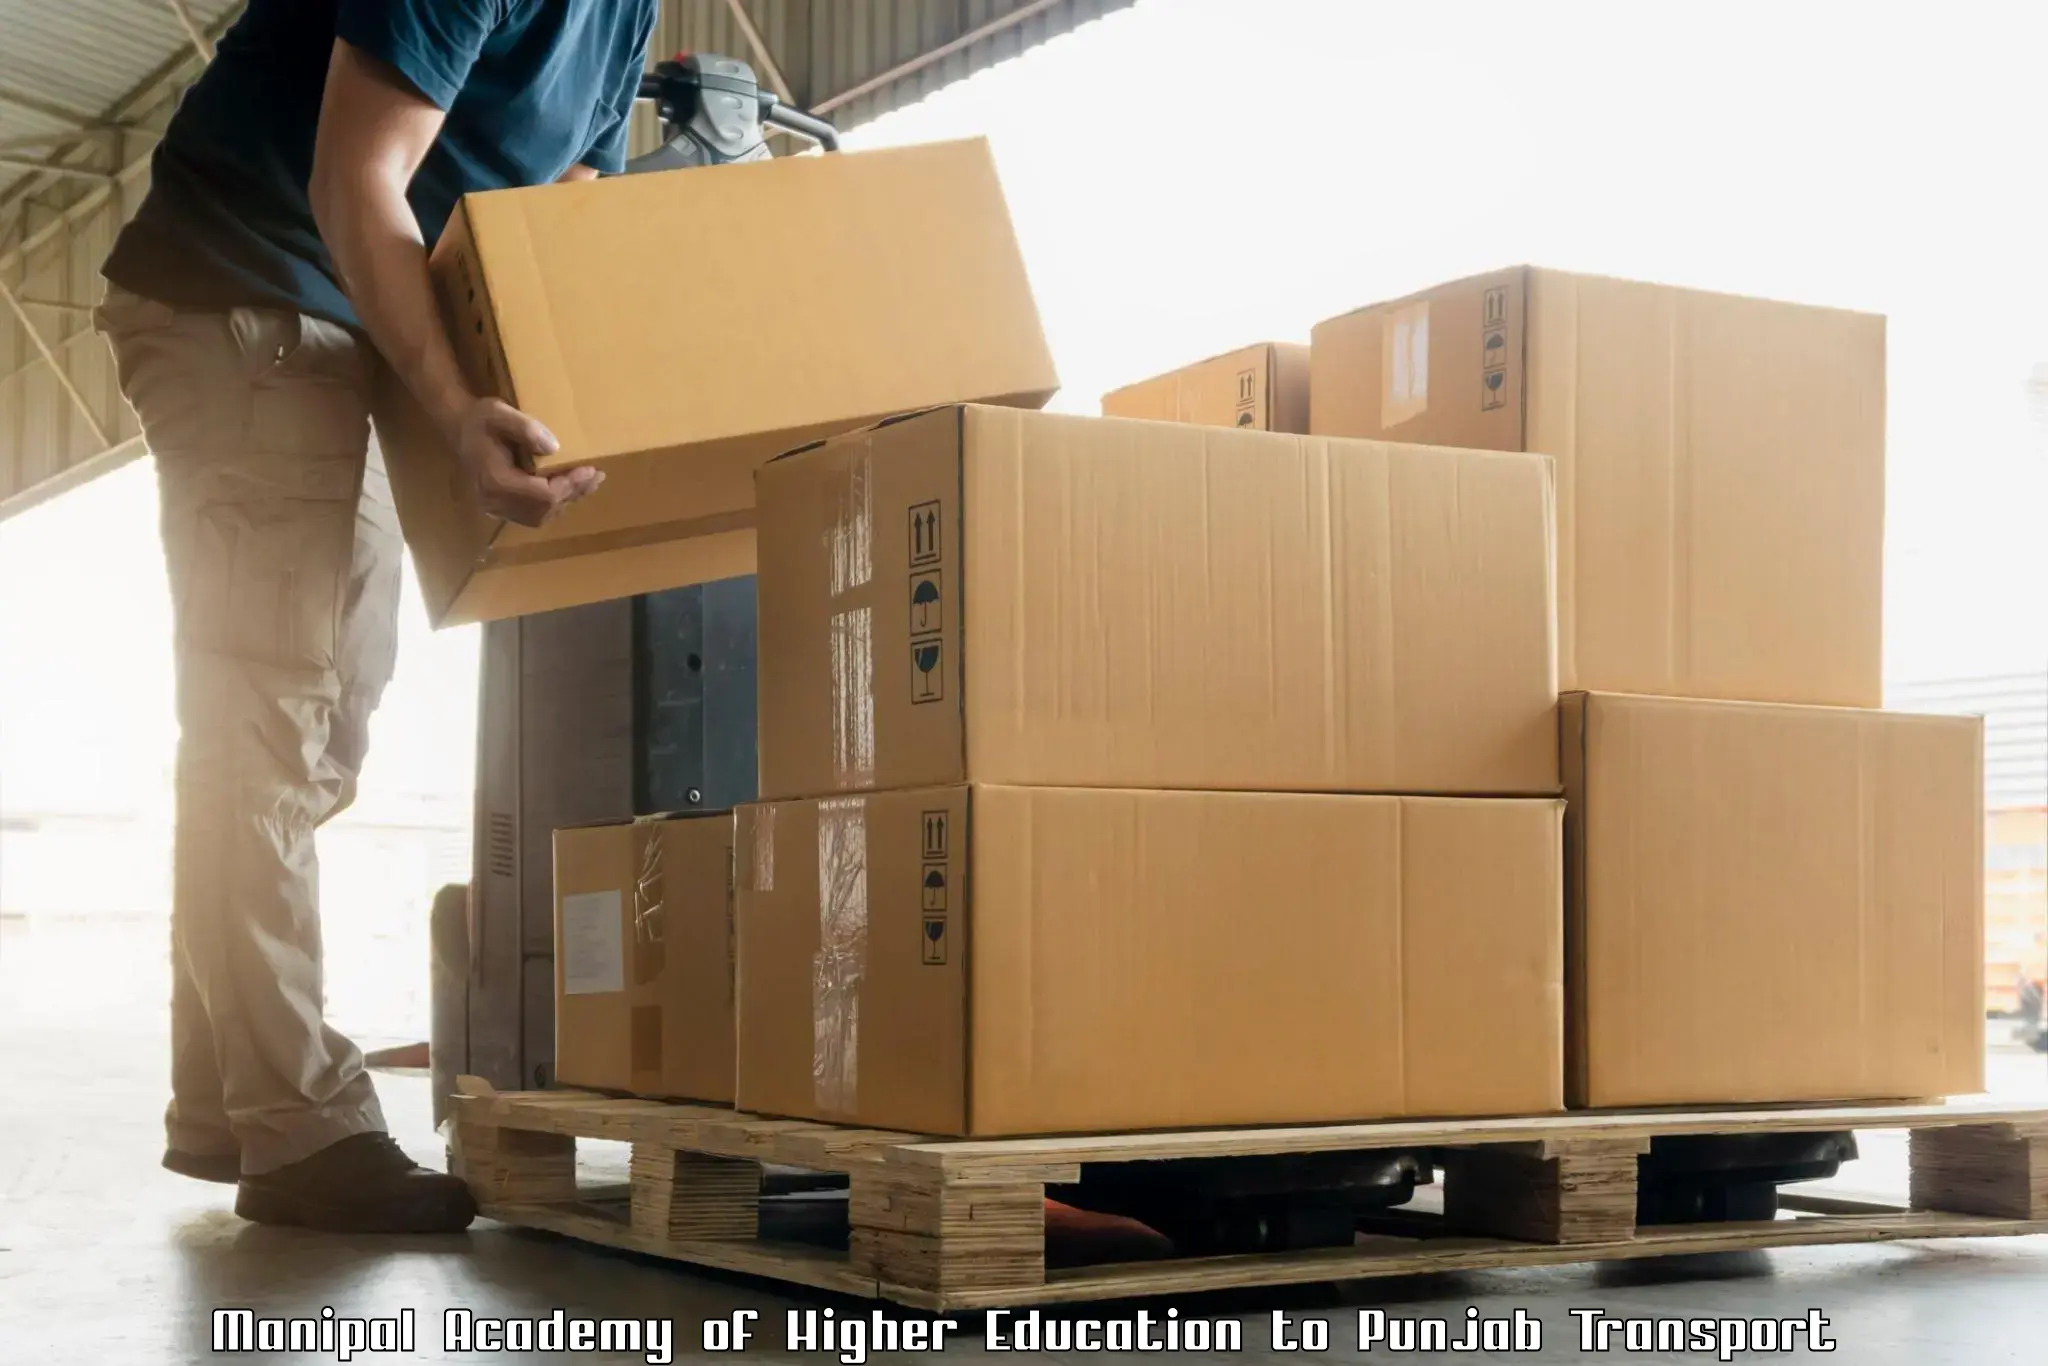 Parcel transport services Manipal Academy of Higher Education to Zirakpur